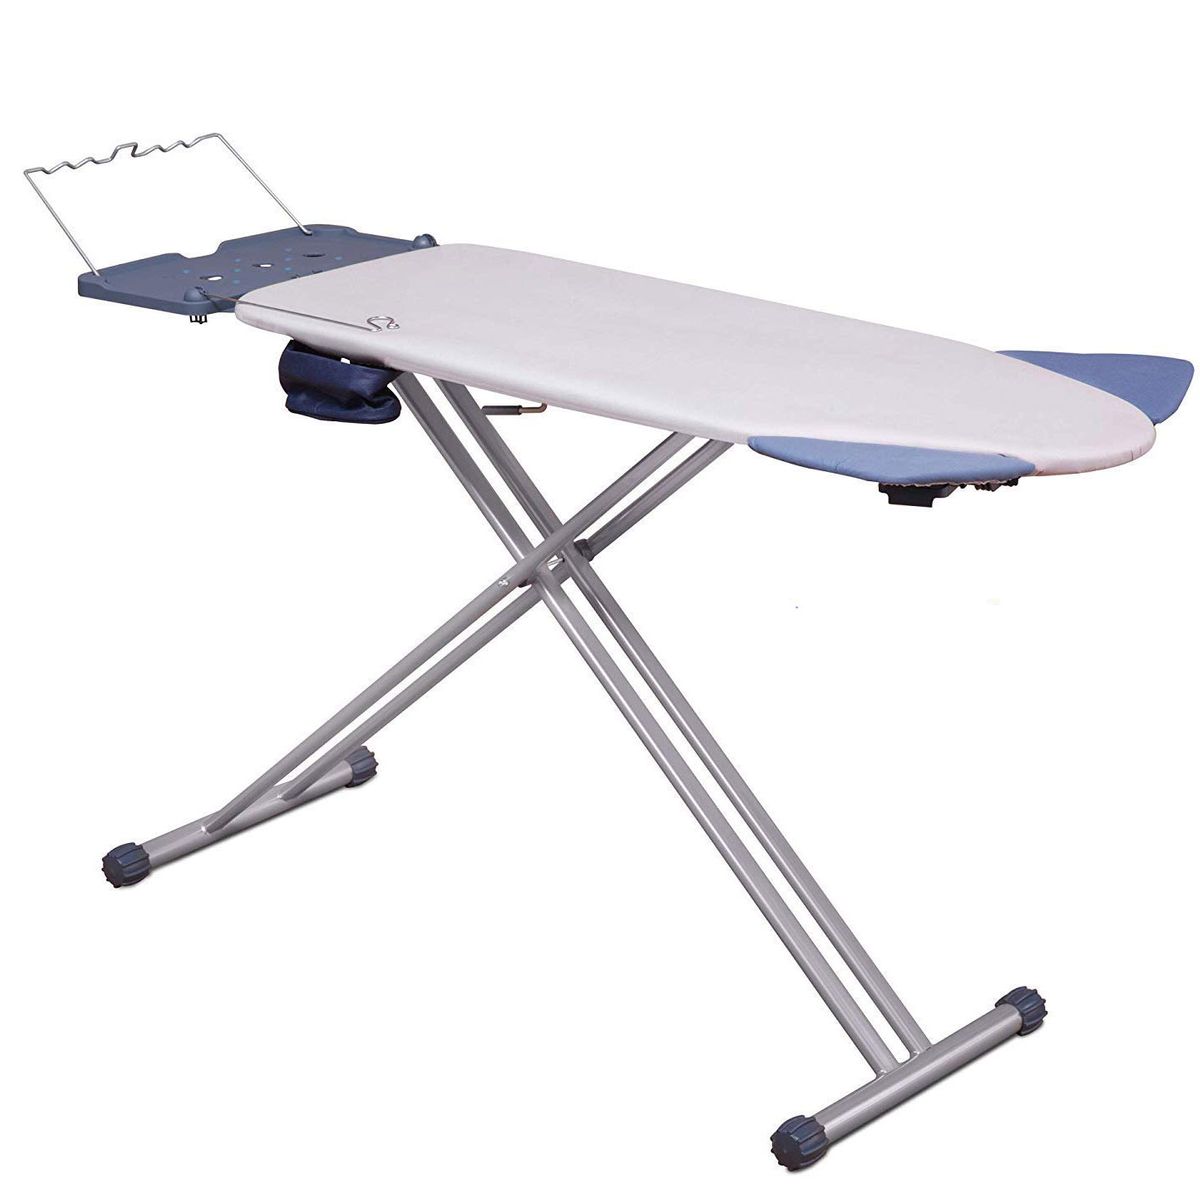 Wotryit Adjustable Ironing Board Stability Space Saving Size 48x15‘’ Home Ironing Board 4 Leg Foldable Adjustable Board with Cover US Stock Steam Iron Rest